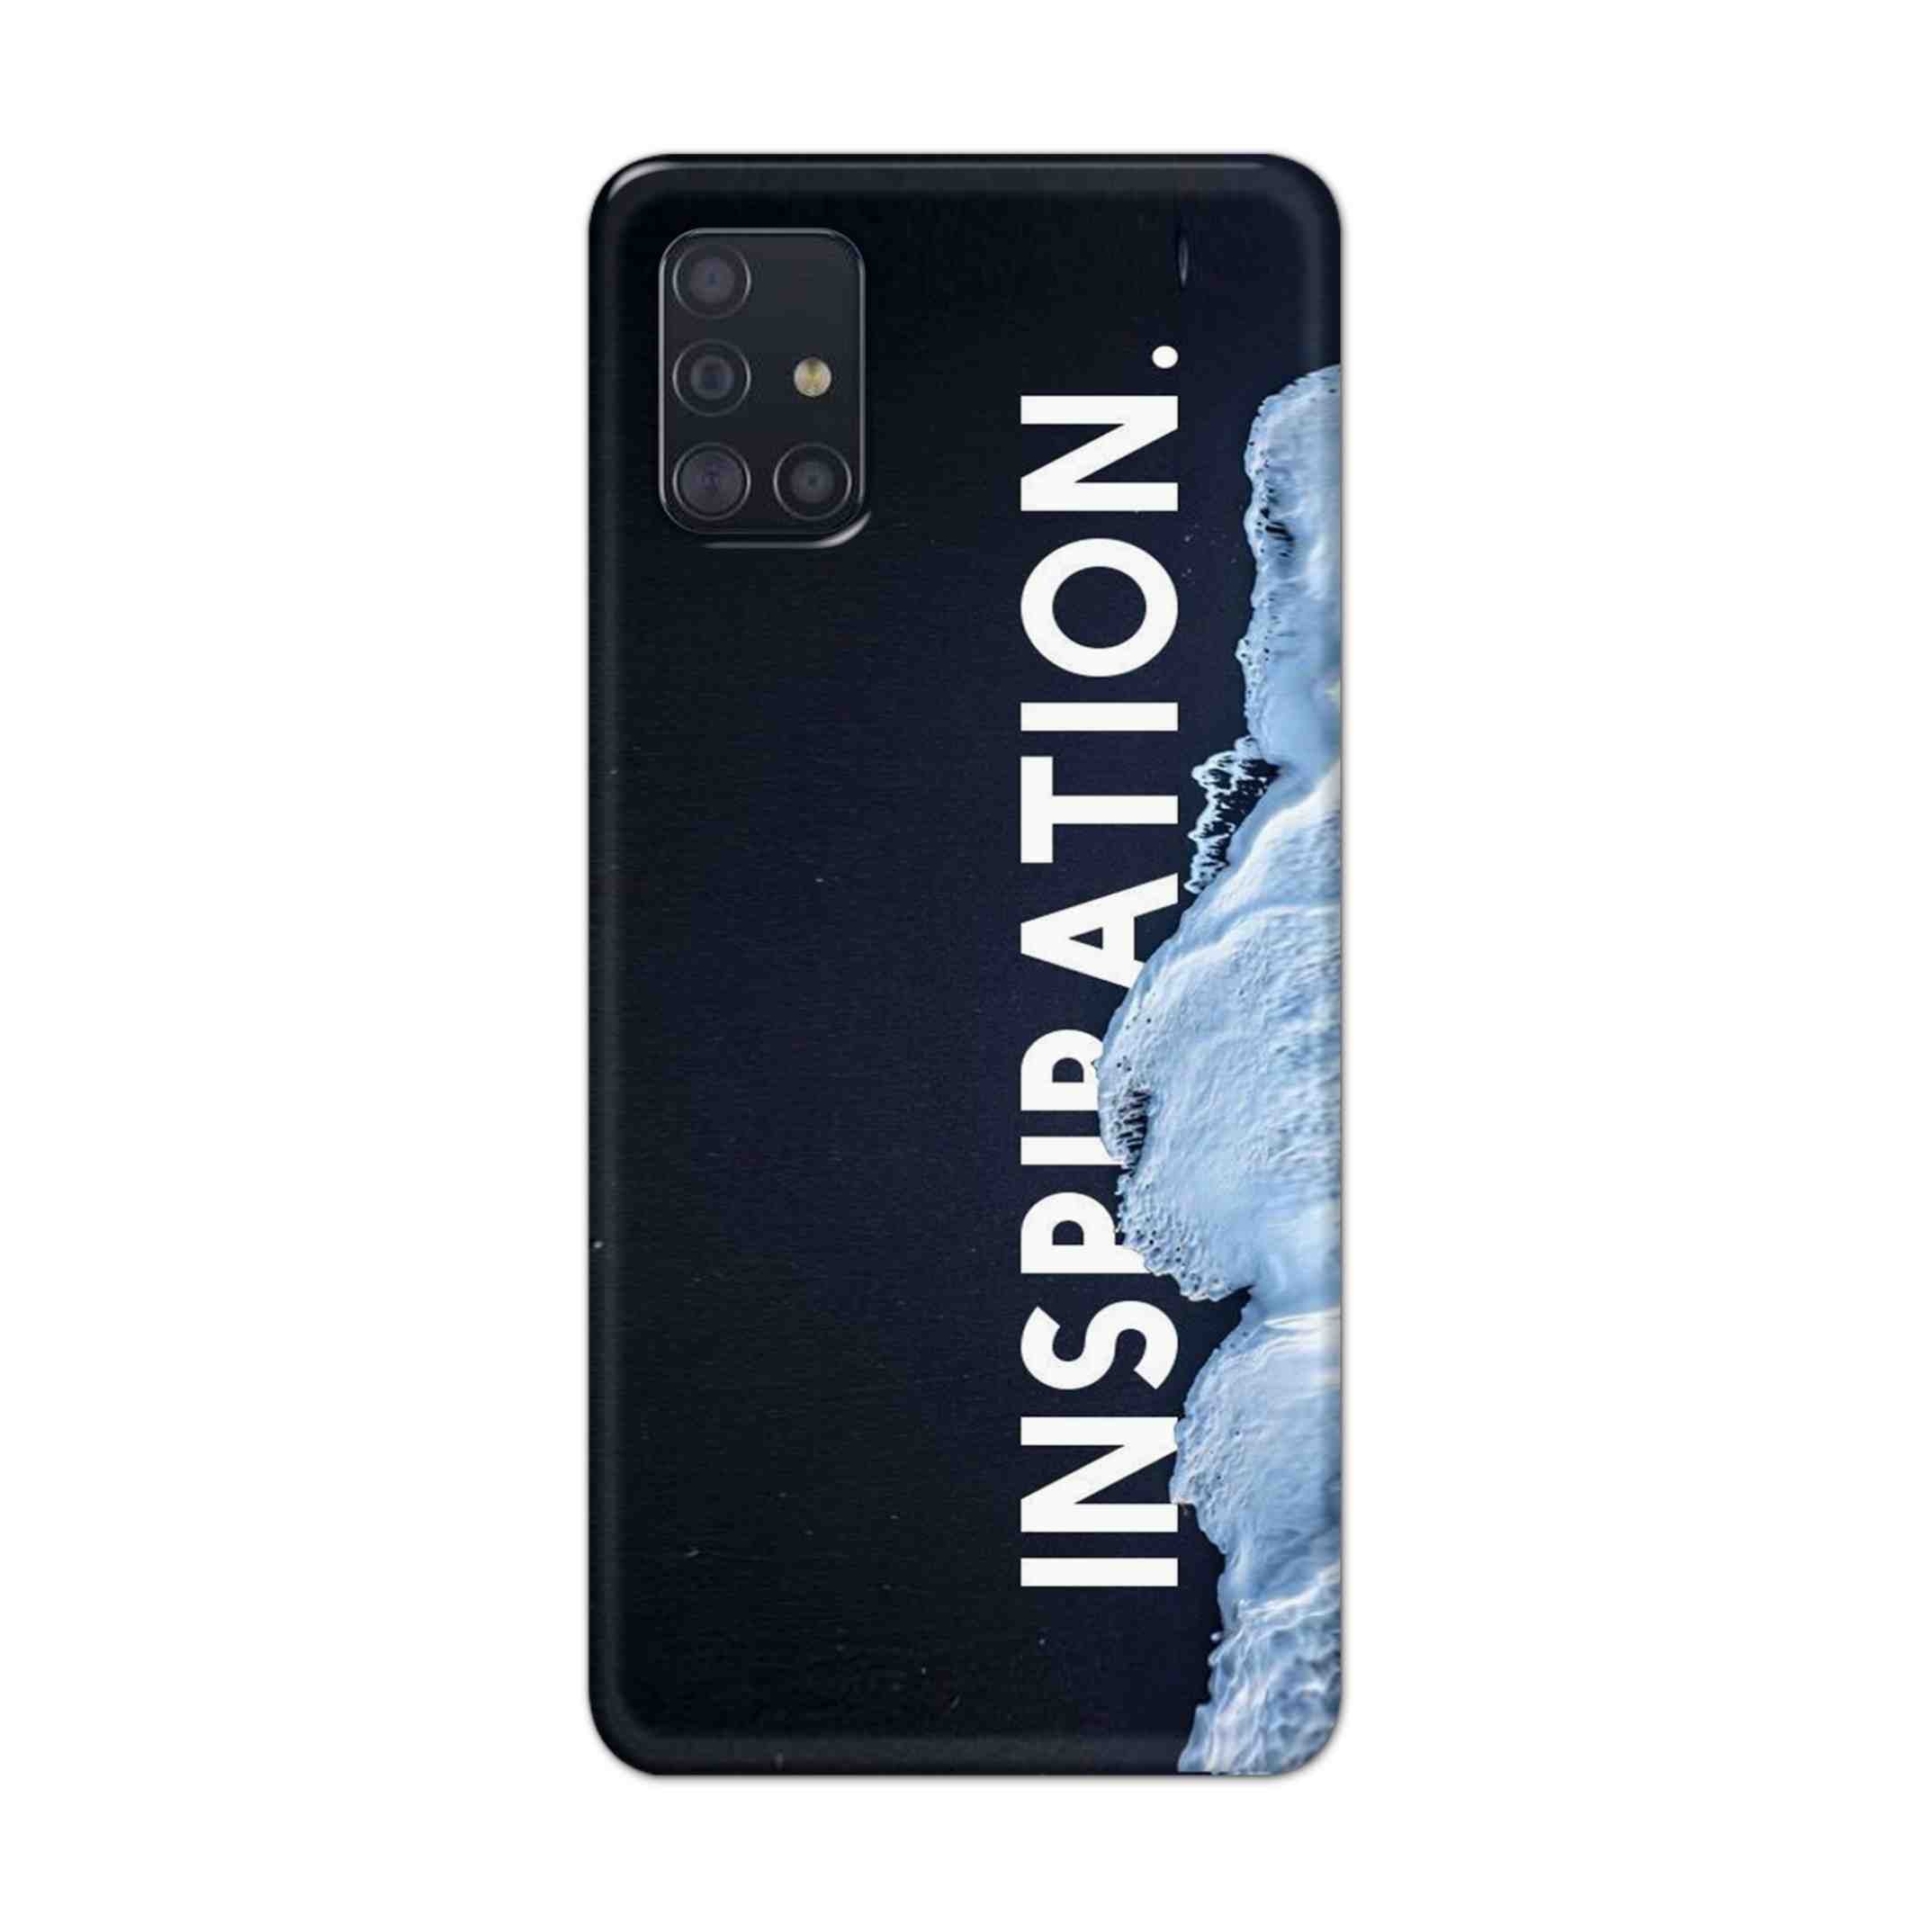 Buy Inspiration Hard Back Mobile Phone Case Cover For Samsung Galaxy M31s Online